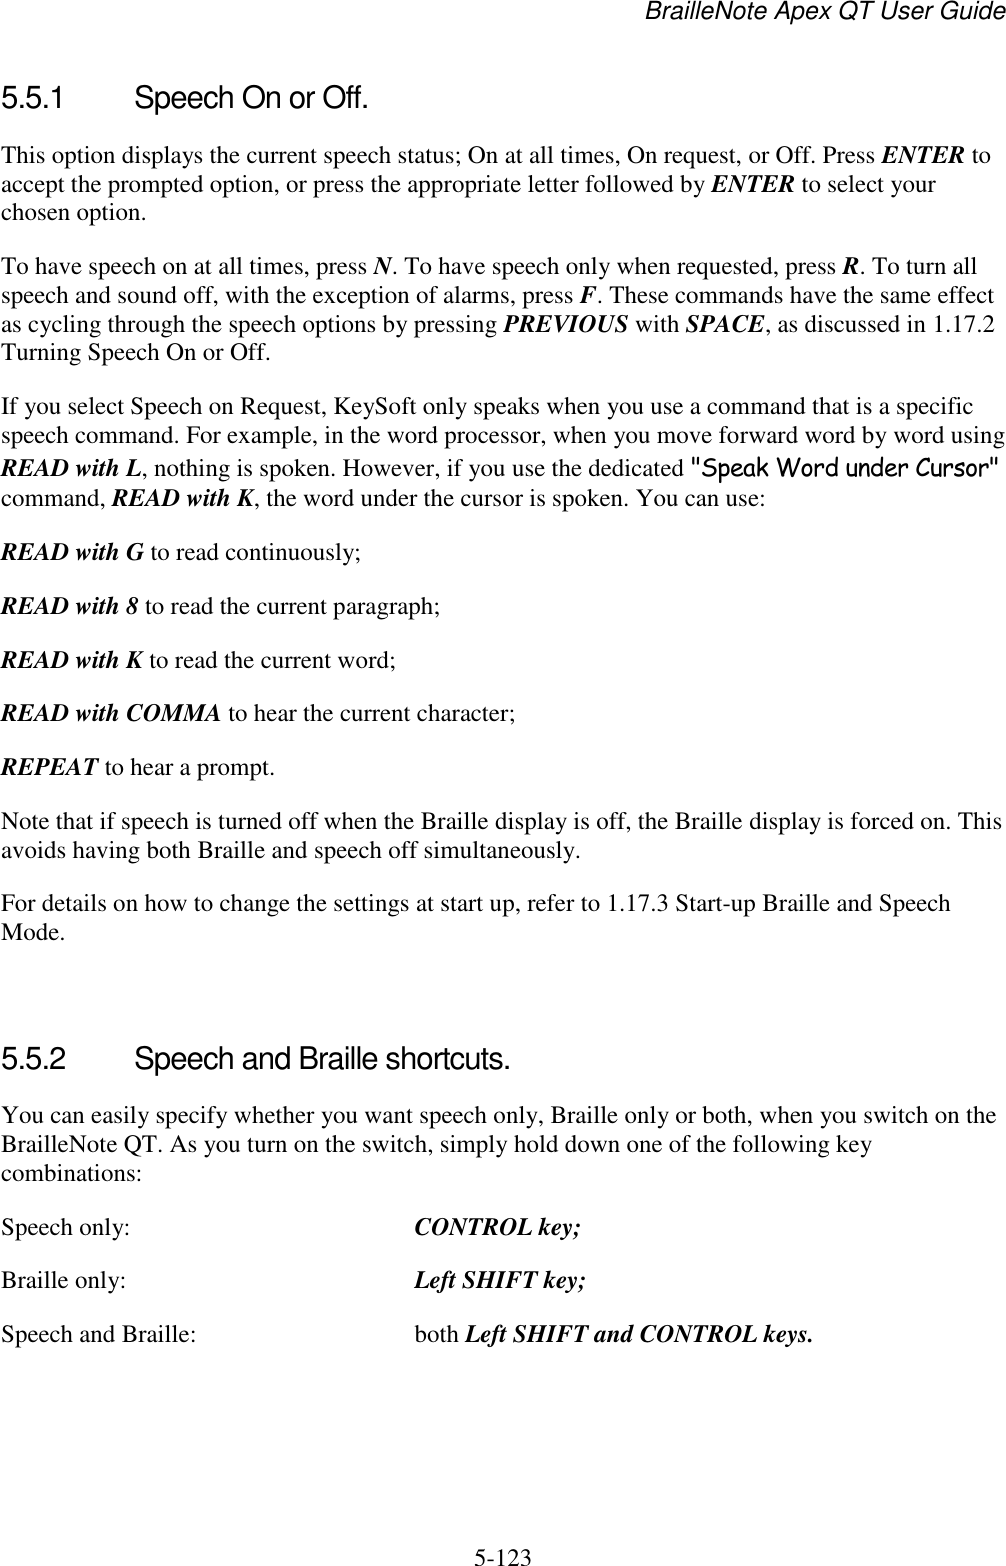 BrailleNote Apex QT User Guide  5-123   5.5.1  Speech On or Off. This option displays the current speech status; On at all times, On request, or Off. Press ENTER to accept the prompted option, or press the appropriate letter followed by ENTER to select your chosen option. To have speech on at all times, press N. To have speech only when requested, press R. To turn all speech and sound off, with the exception of alarms, press F. These commands have the same effect as cycling through the speech options by pressing PREVIOUS with SPACE, as discussed in 1.17.2 Turning Speech On or Off. If you select Speech on Request, KeySoft only speaks when you use a command that is a specific speech command. For example, in the word processor, when you move forward word by word using READ with L, nothing is spoken. However, if you use the dedicated &quot;Speak Word under Cursor&quot; command, READ with K, the word under the cursor is spoken. You can use: READ with G to read continuously; READ with 8 to read the current paragraph; READ with K to read the current word; READ with COMMA to hear the current character; REPEAT to hear a prompt. Note that if speech is turned off when the Braille display is off, the Braille display is forced on. This avoids having both Braille and speech off simultaneously. For details on how to change the settings at start up, refer to 1.17.3 Start-up Braille and Speech Mode.    5.5.2  Speech and Braille shortcuts. You can easily specify whether you want speech only, Braille only or both, when you switch on the BrailleNote QT. As you turn on the switch, simply hold down one of the following key combinations: Speech only:  CONTROL key; Braille only:  Left SHIFT key; Speech and Braille:  both Left SHIFT and CONTROL keys.   